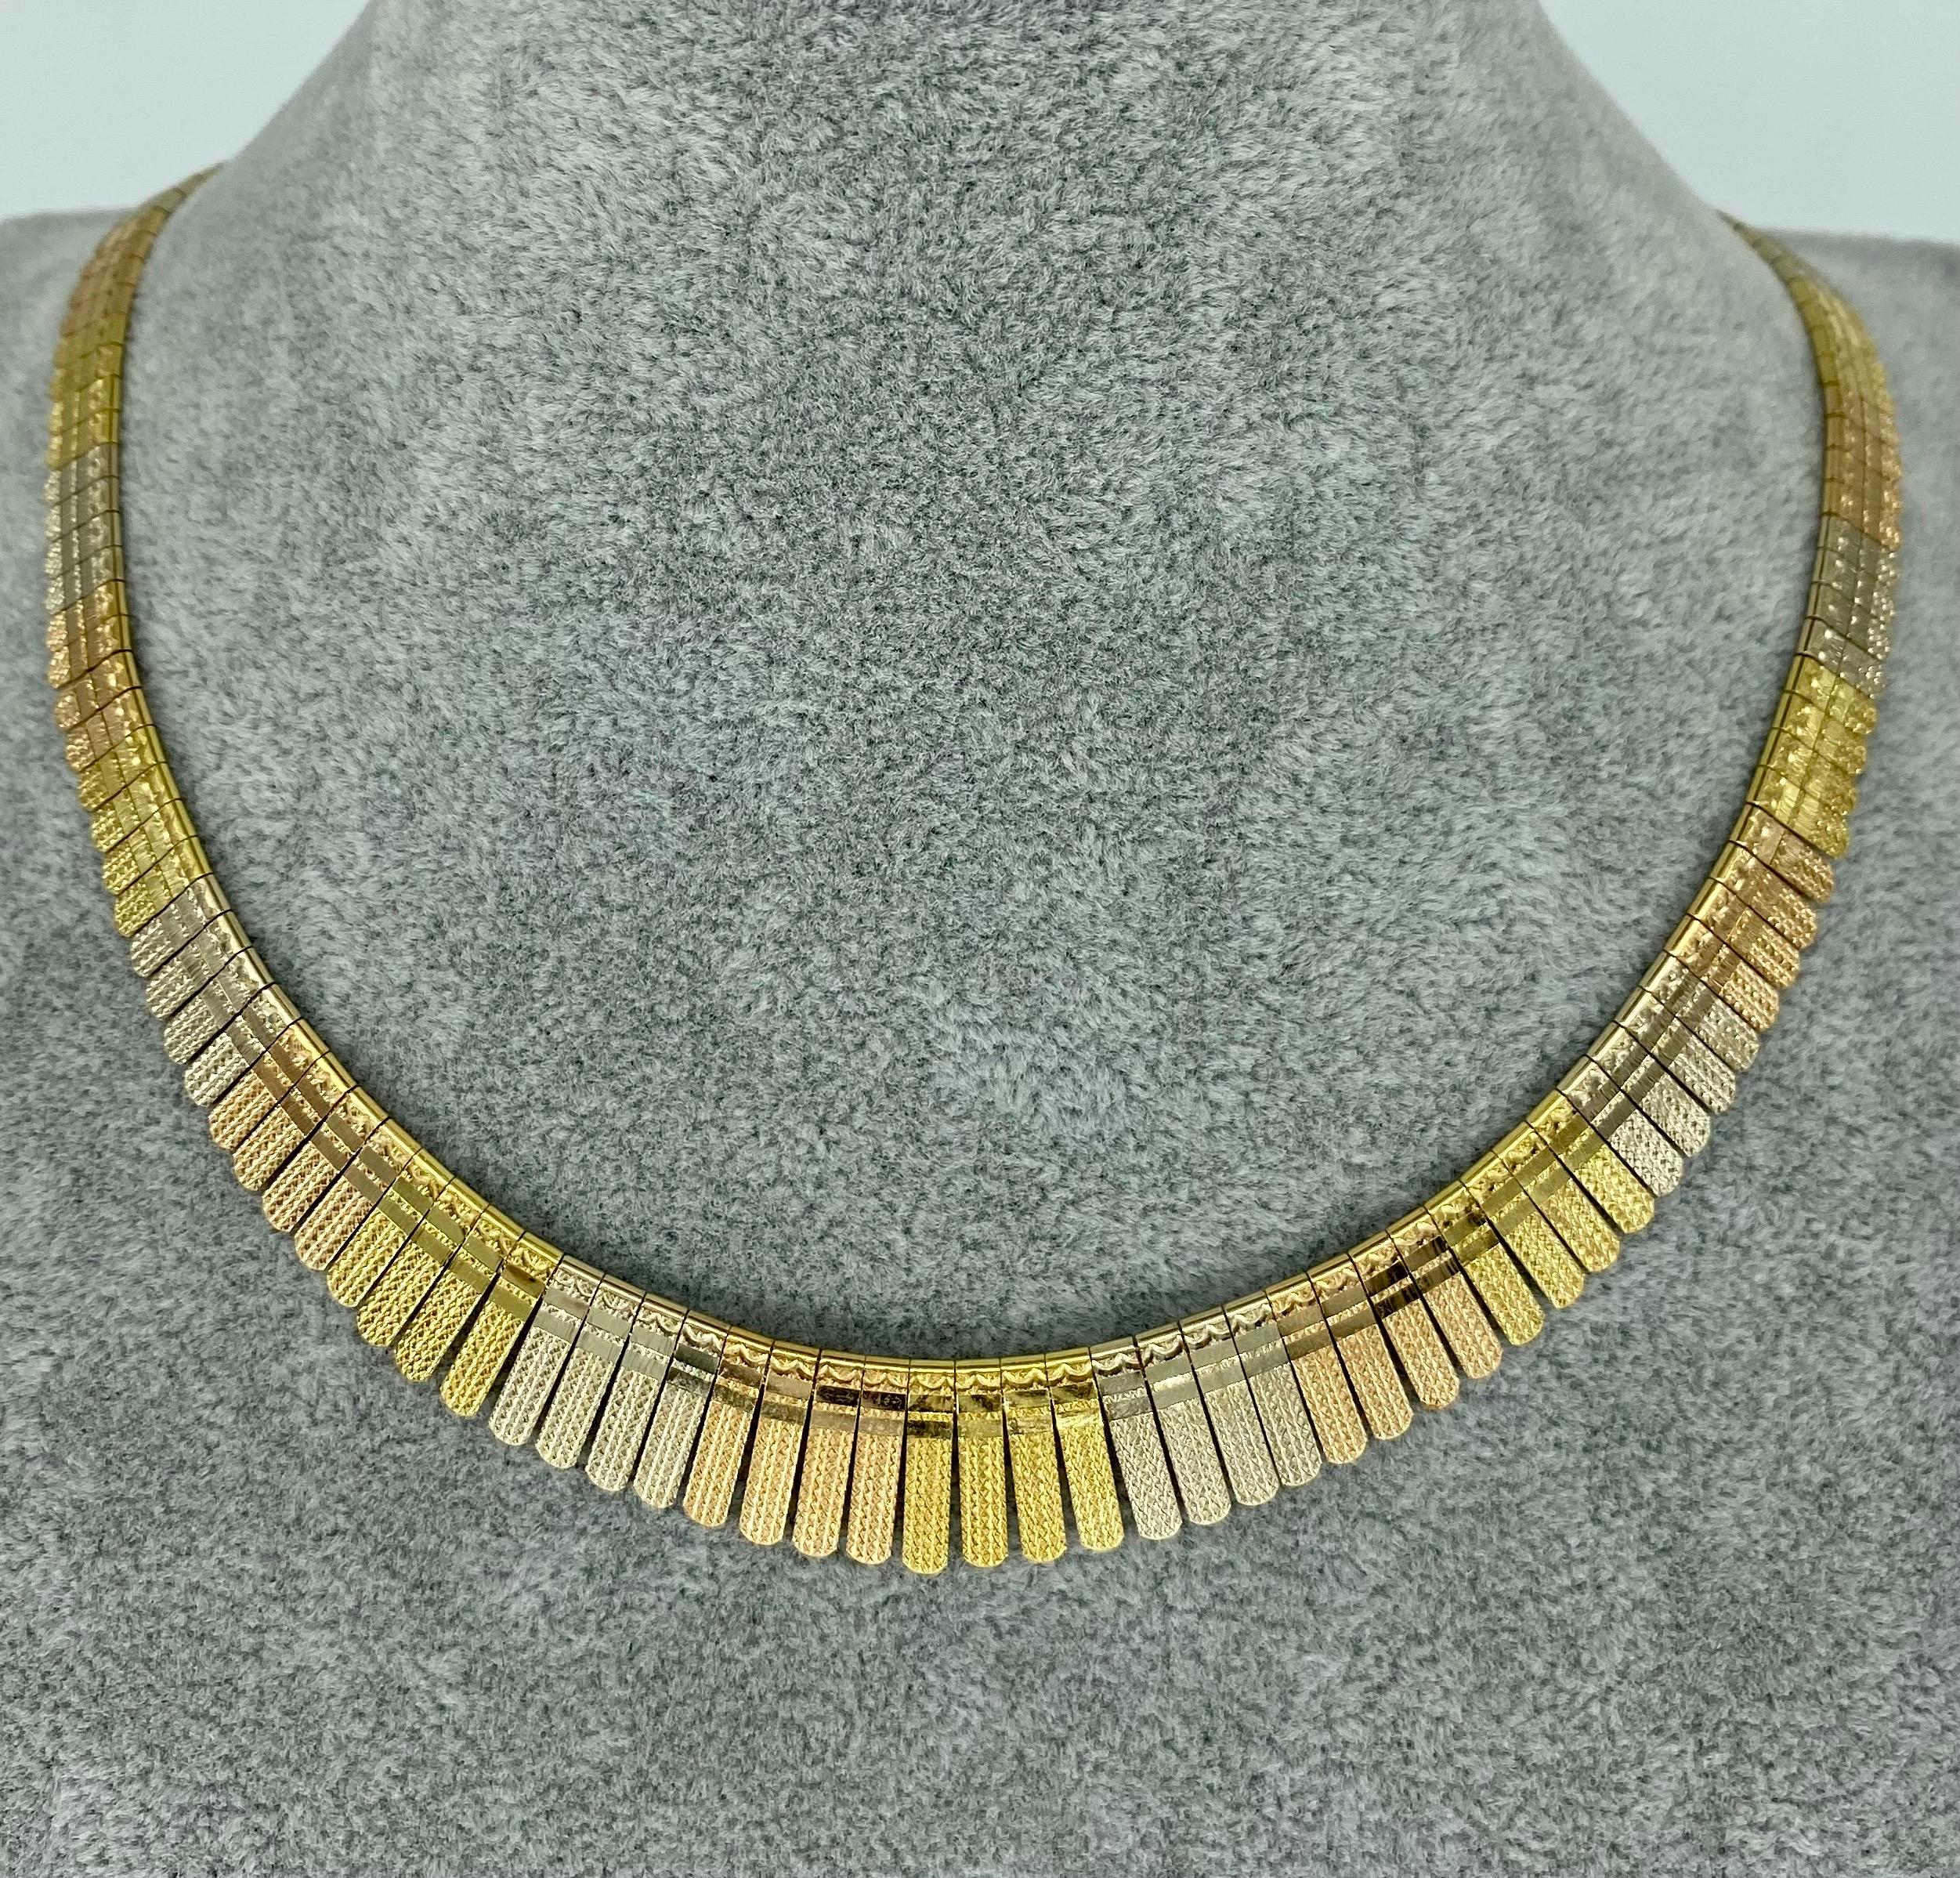 Vintage Italian Graduating Cleopatra Diamond Cut Tri-Color Gold Choker 18k Gold. Beautiful and shiny tri color gold featuring yellow gold, rose gold and white gold. The choker features fancy cleopatra style with diamond cuts accents throughout.